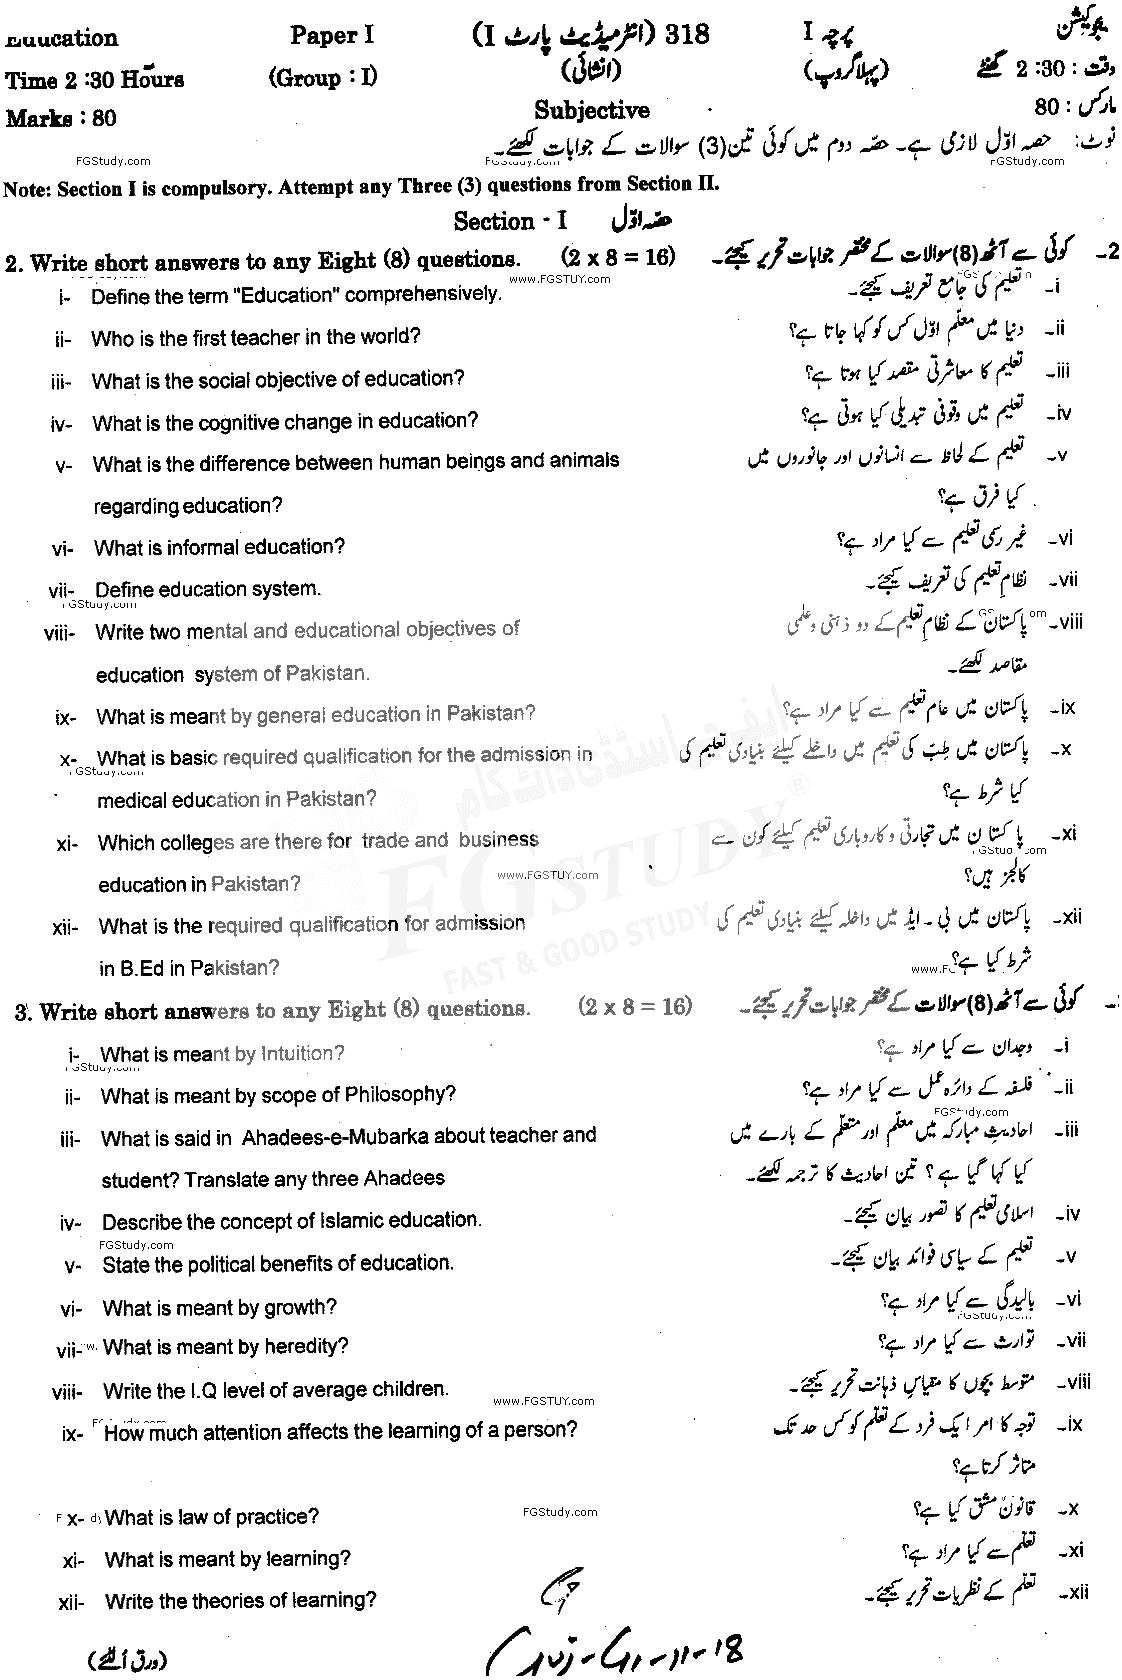 11th Class Education Past Paper 2018 Gujranwala Board Group 1 Subjective